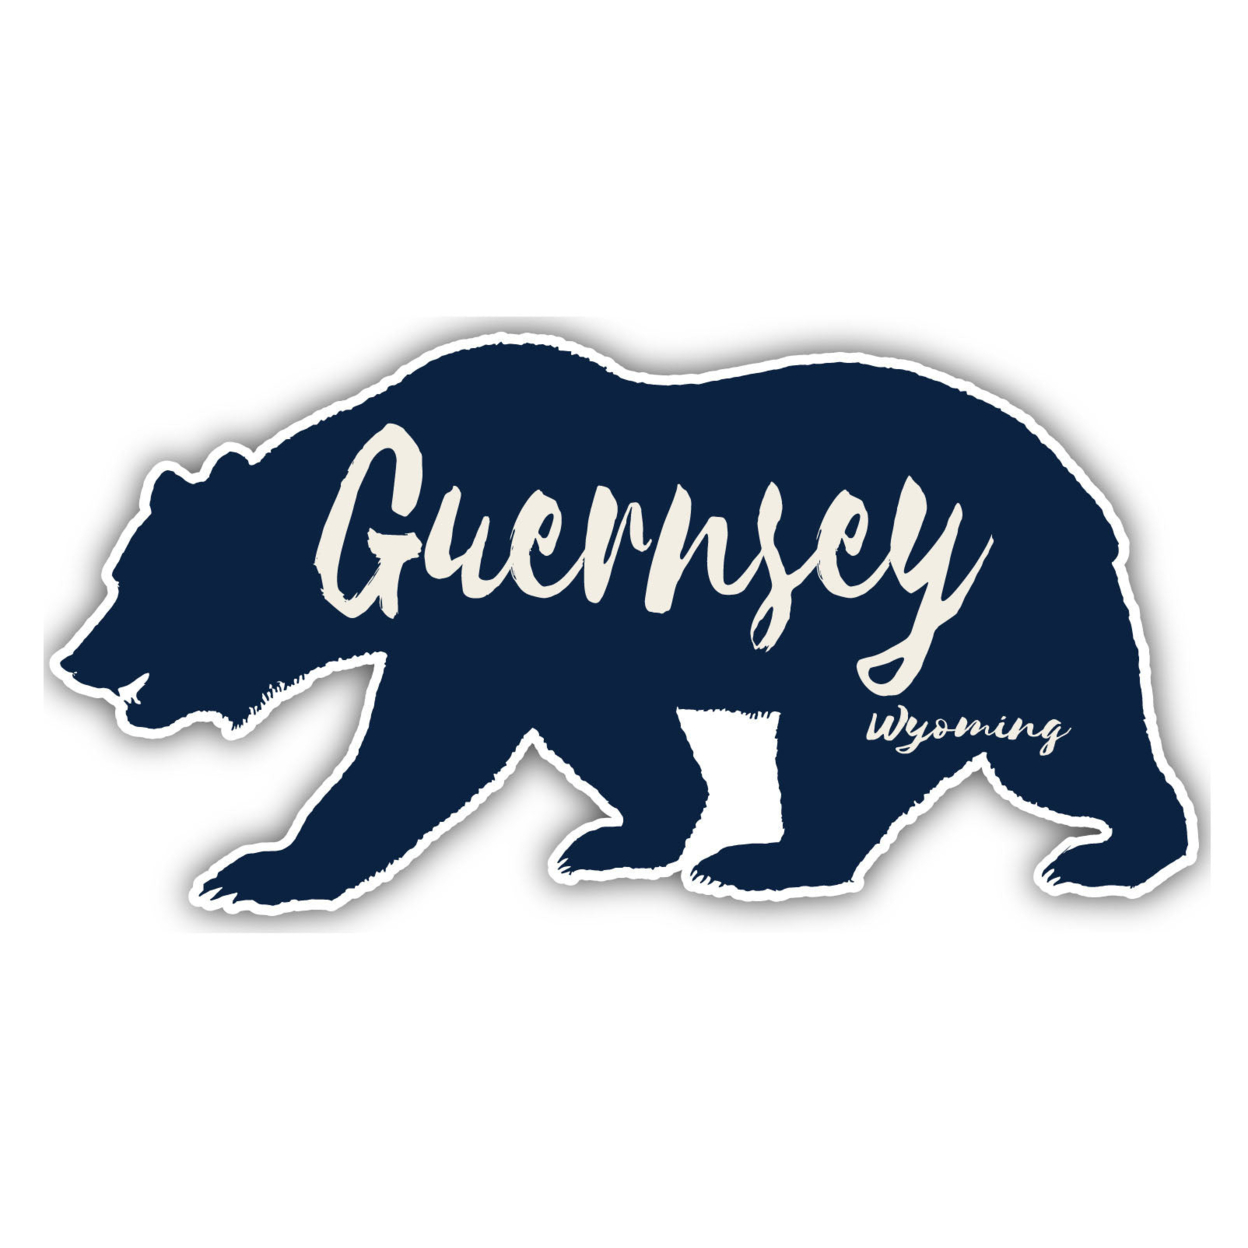 Guernsey Wyoming Souvenir Decorative Stickers (Choose Theme And Size) - 4-Pack, 12-Inch, Bear